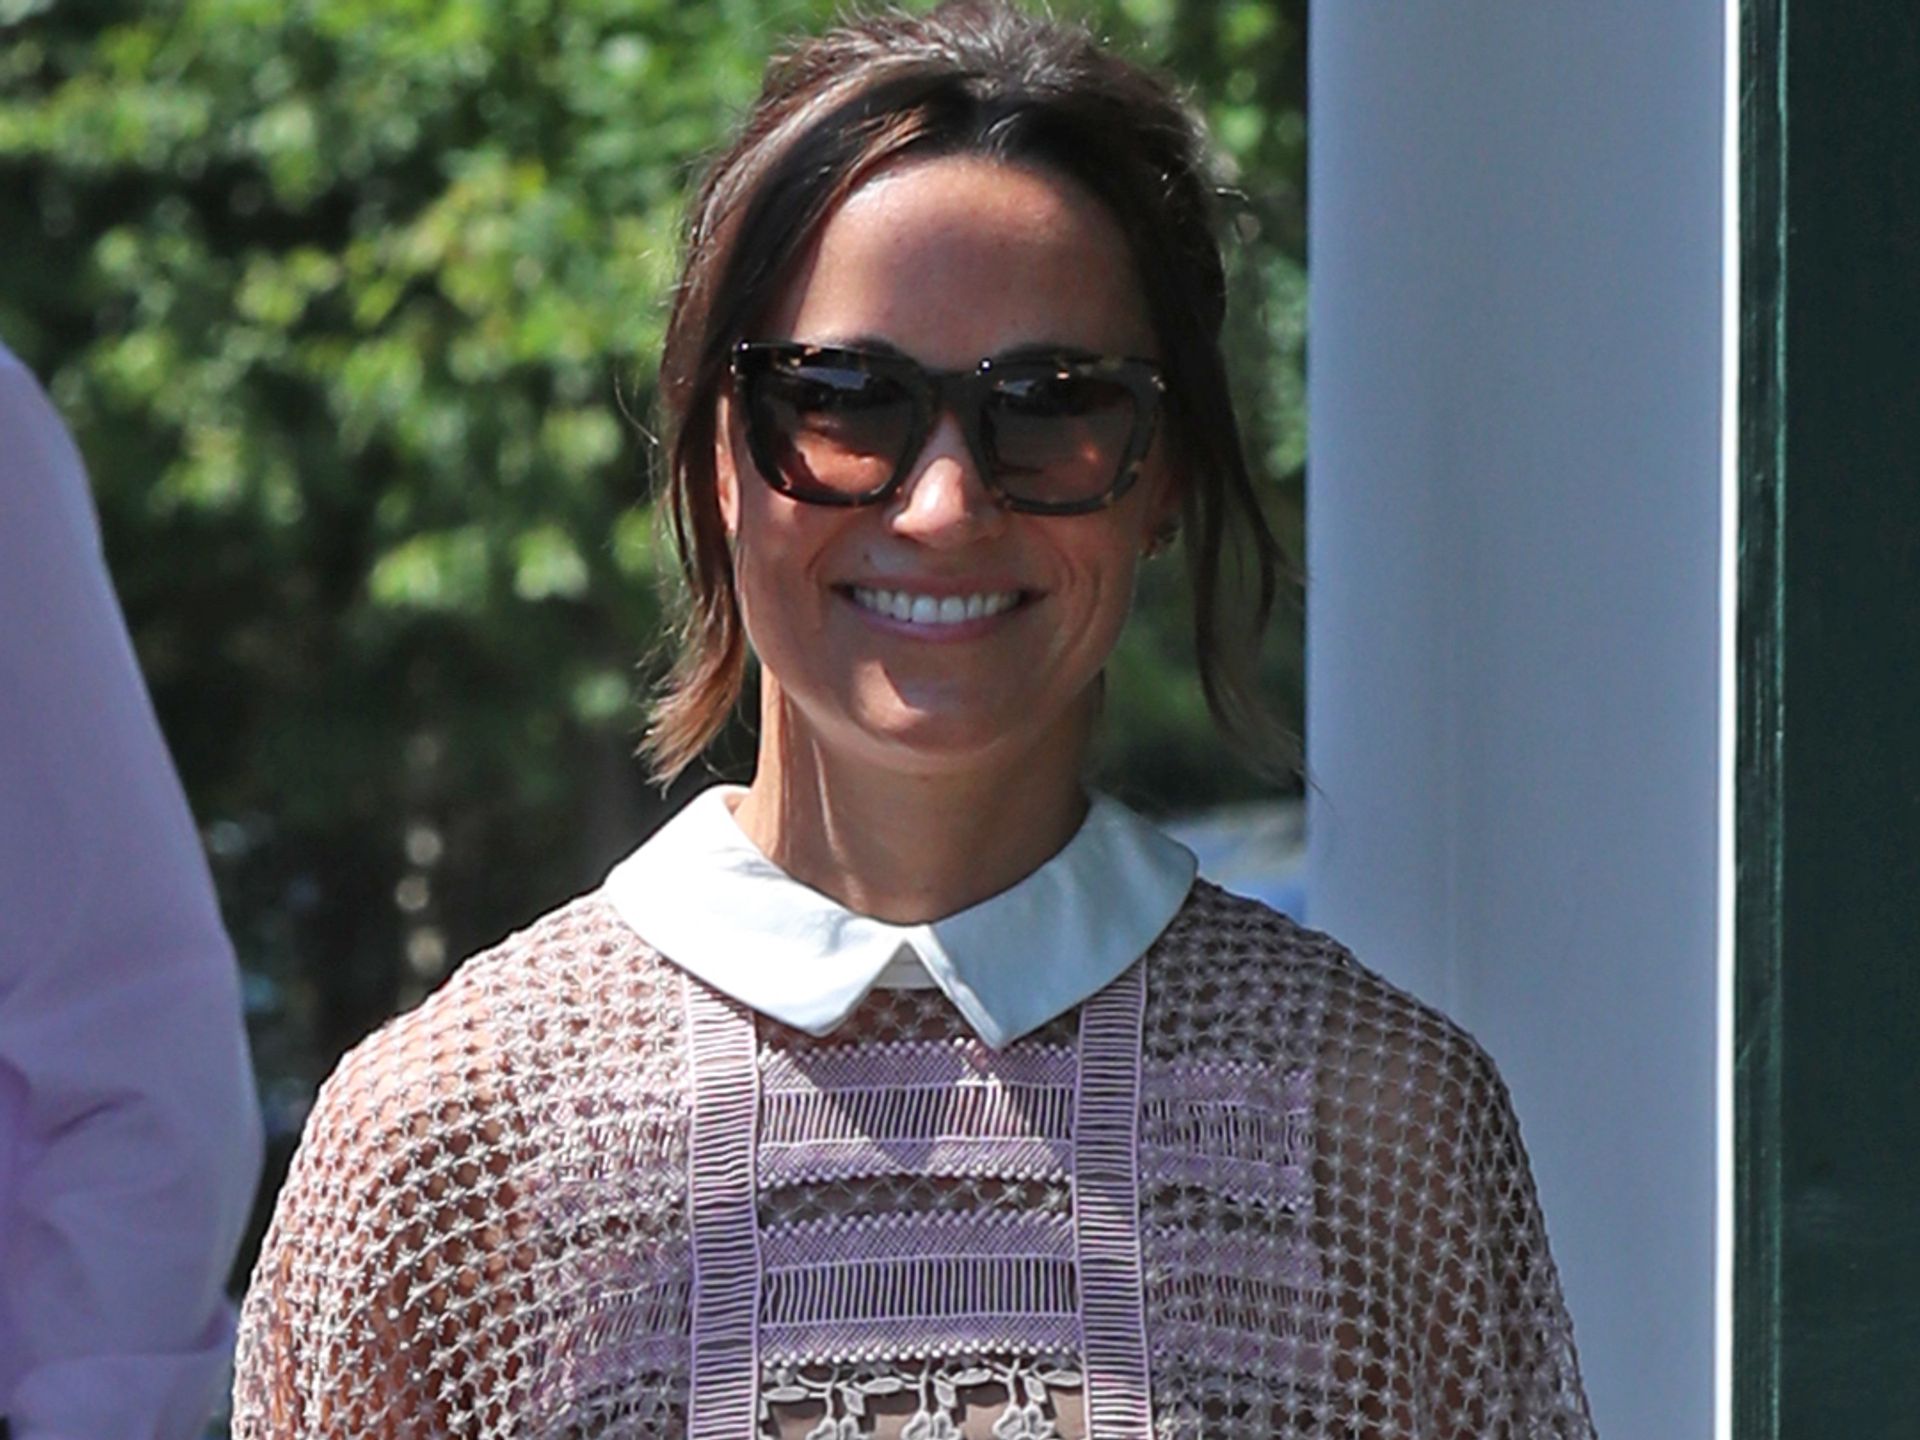 Pippa Middleton looks red-hot in ruffled gown at Lake Como wedding